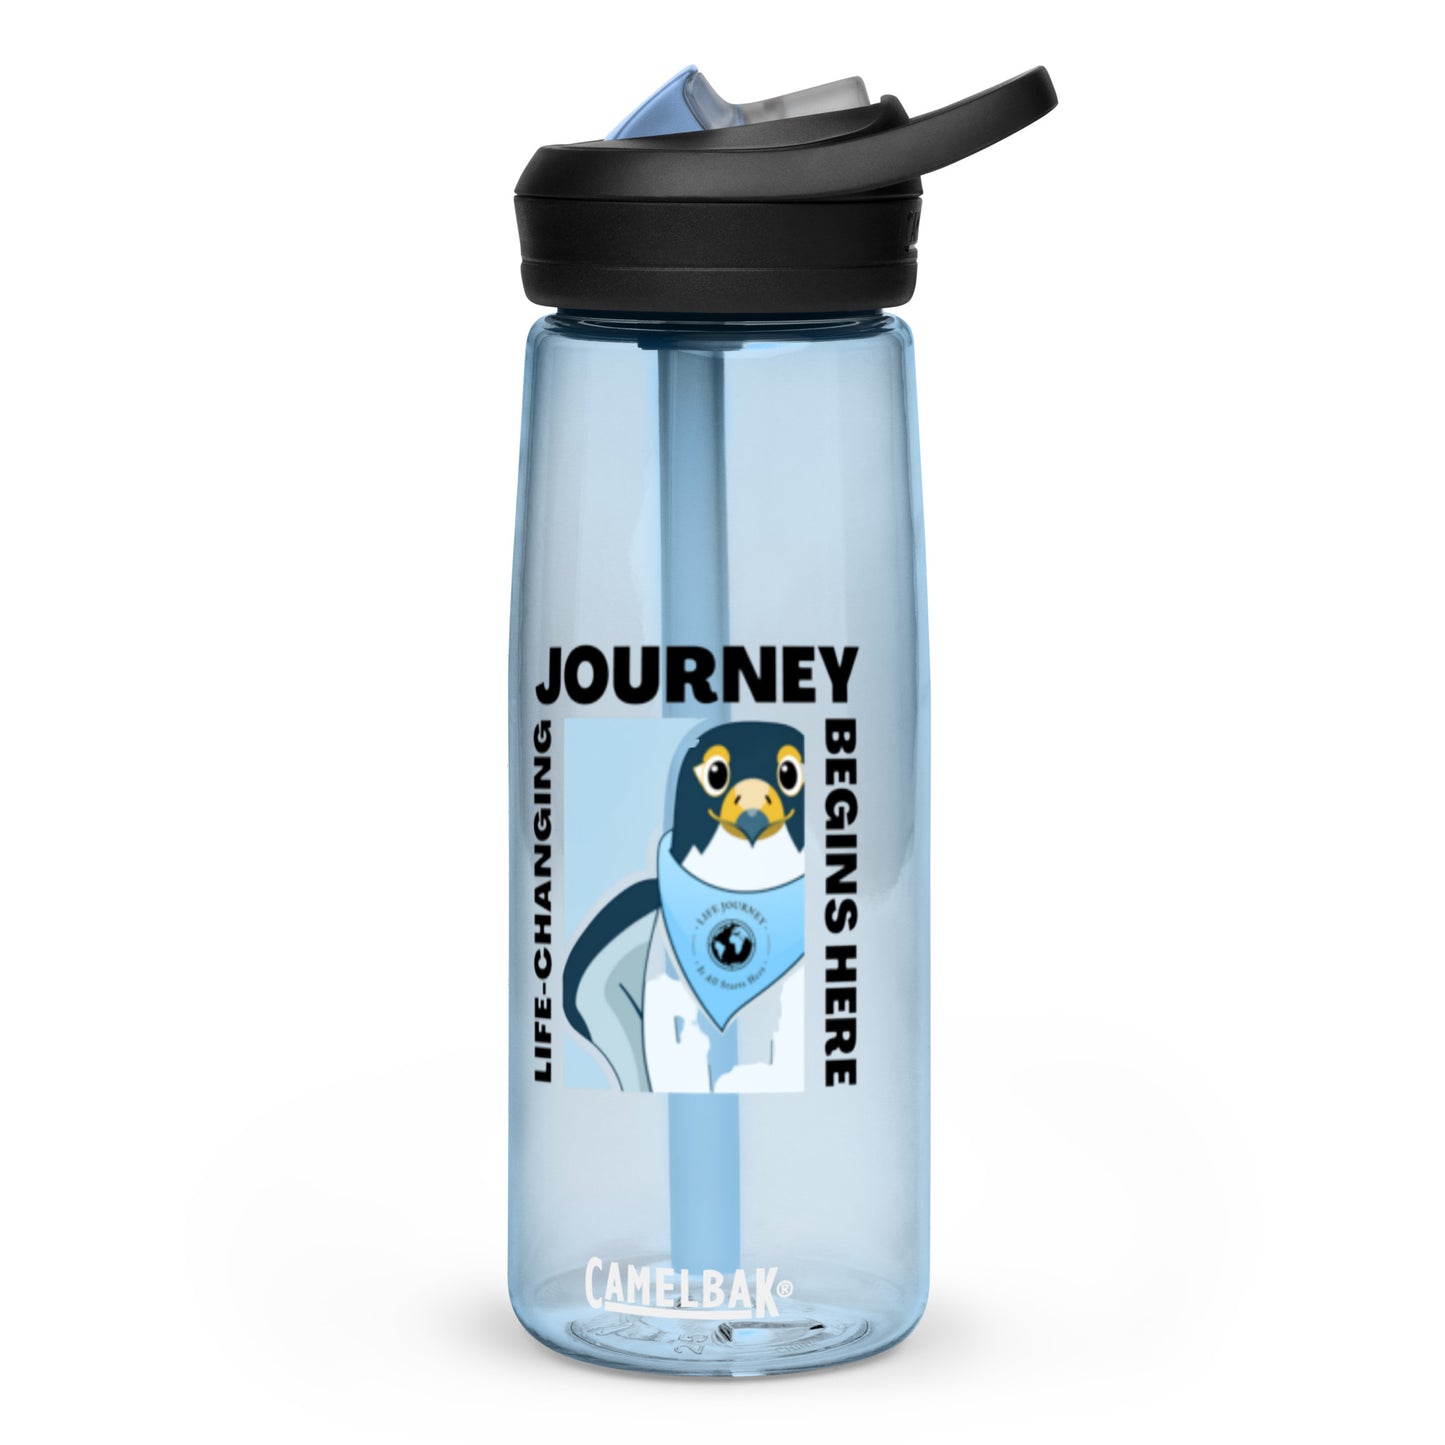 Sports water bottle Life Changing Journey Begins Here